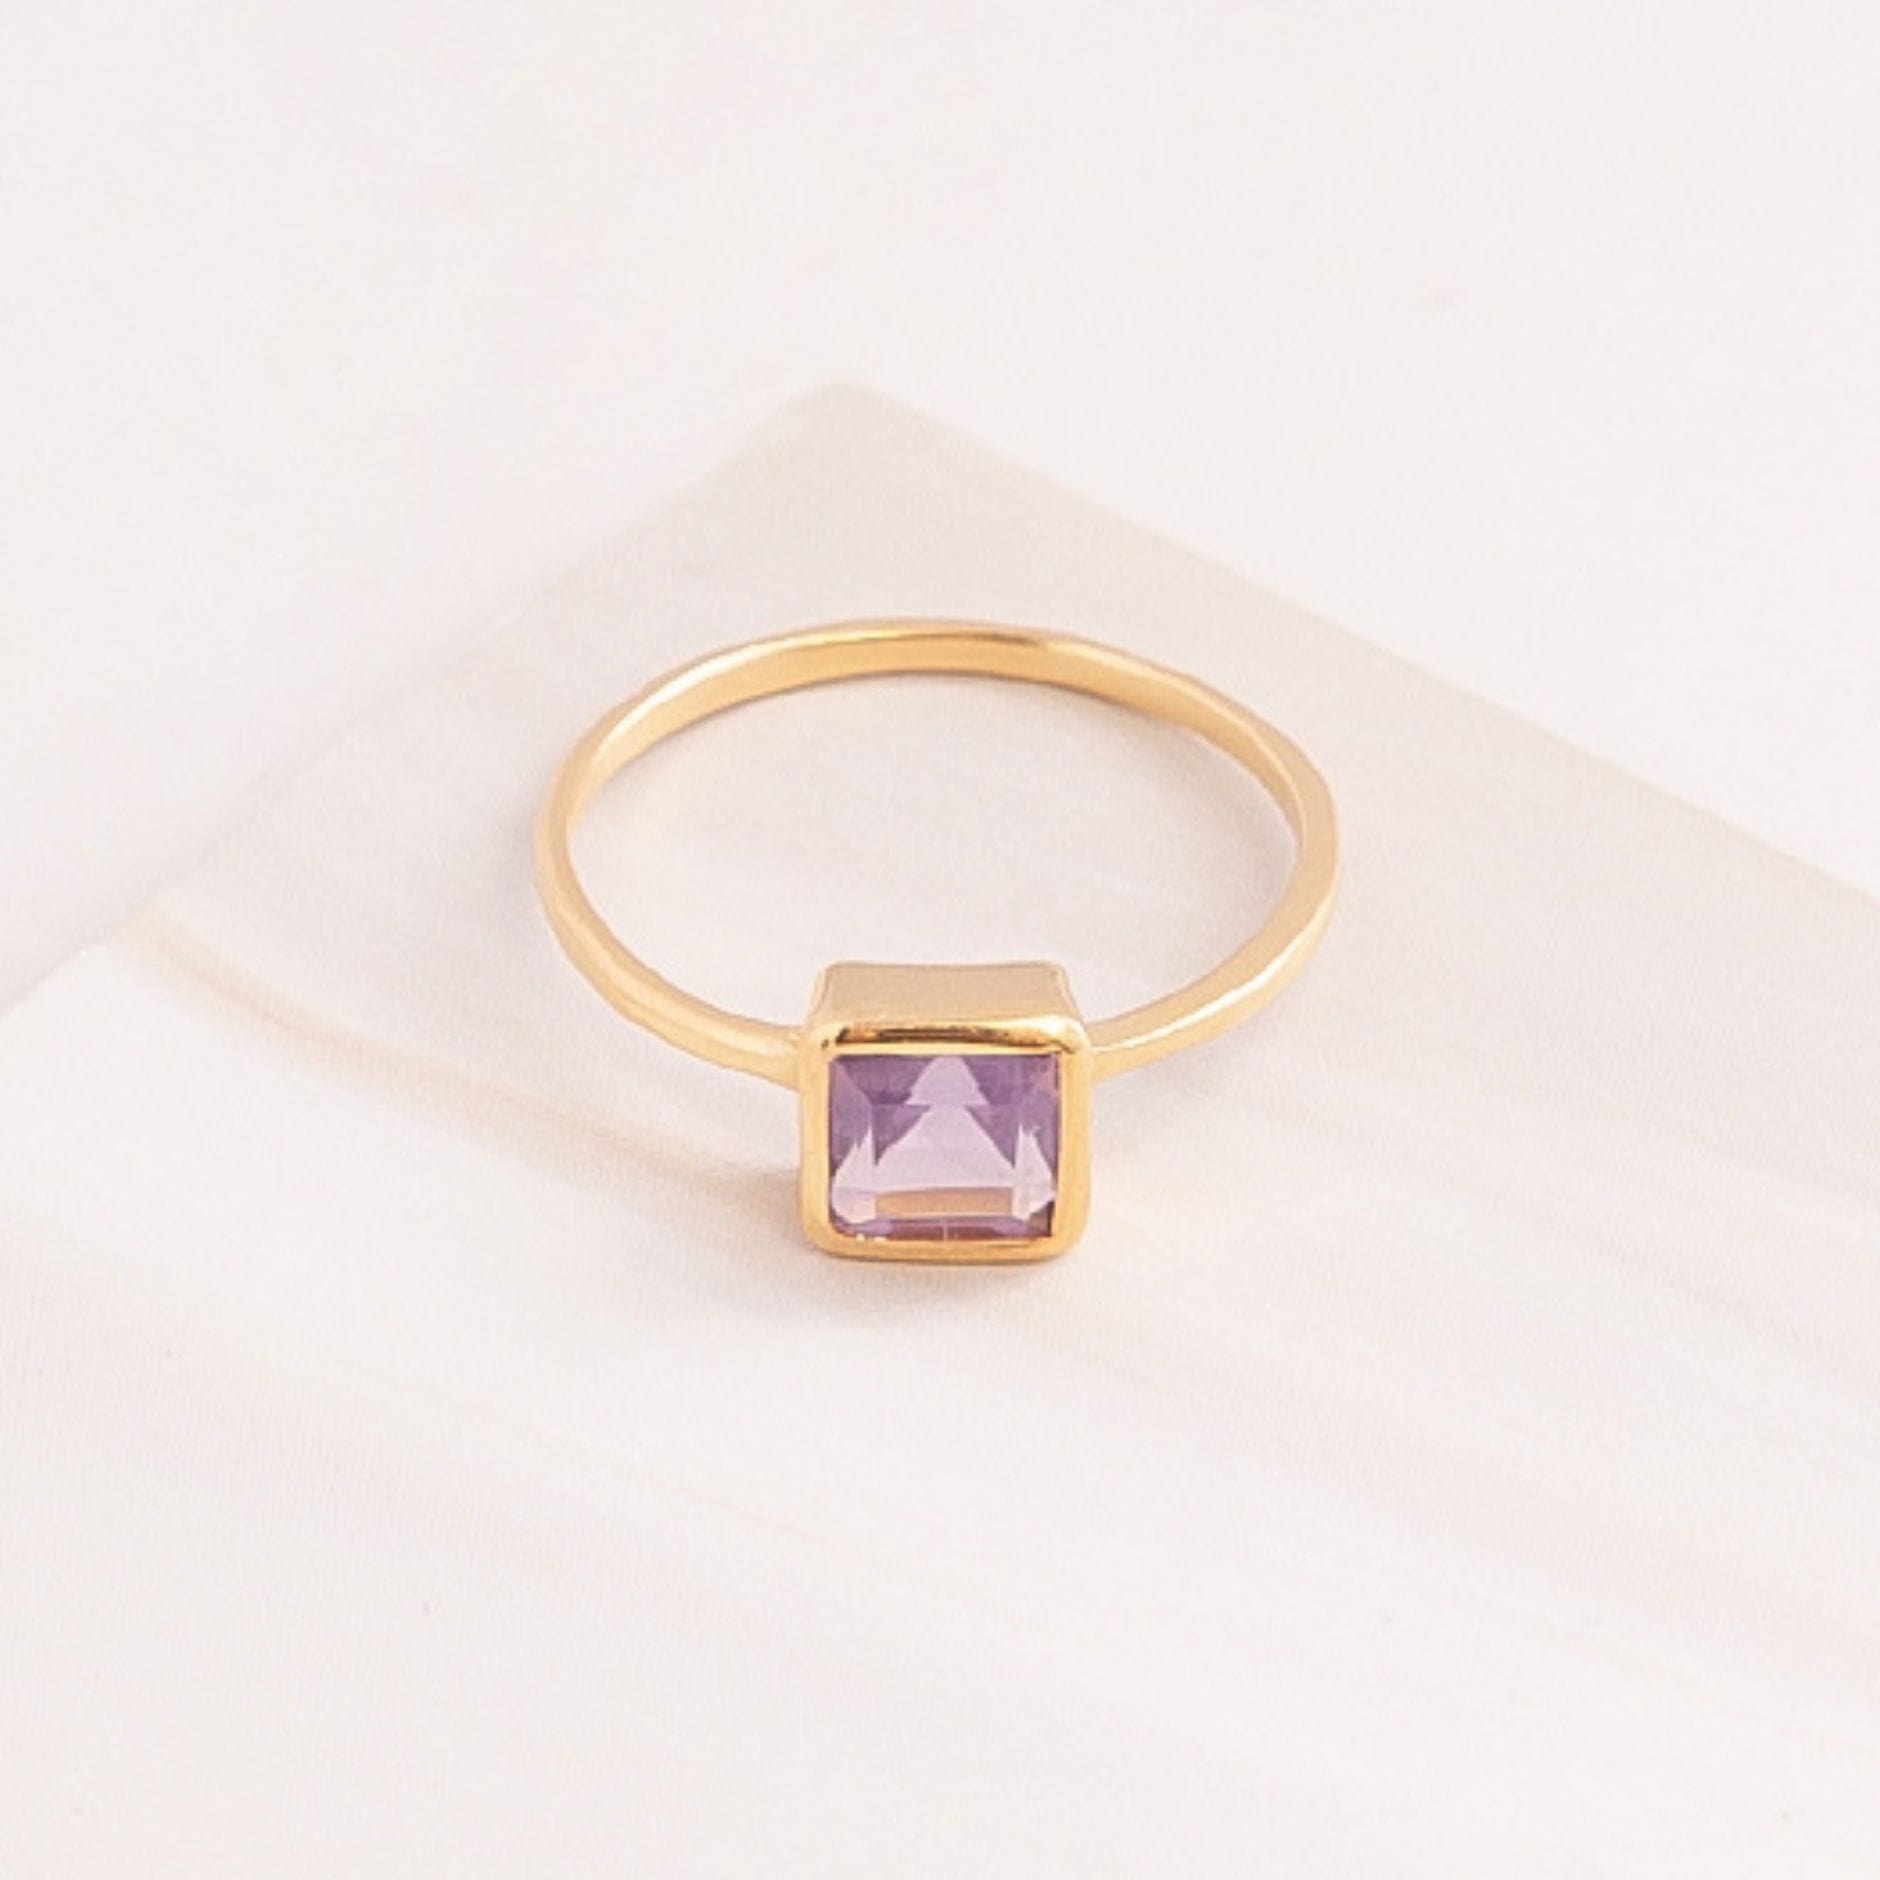 Emblem Jewelry Rings Purple Amethyst / Square Signature Candy Gemstone Stack Rings (Ring Size 5)